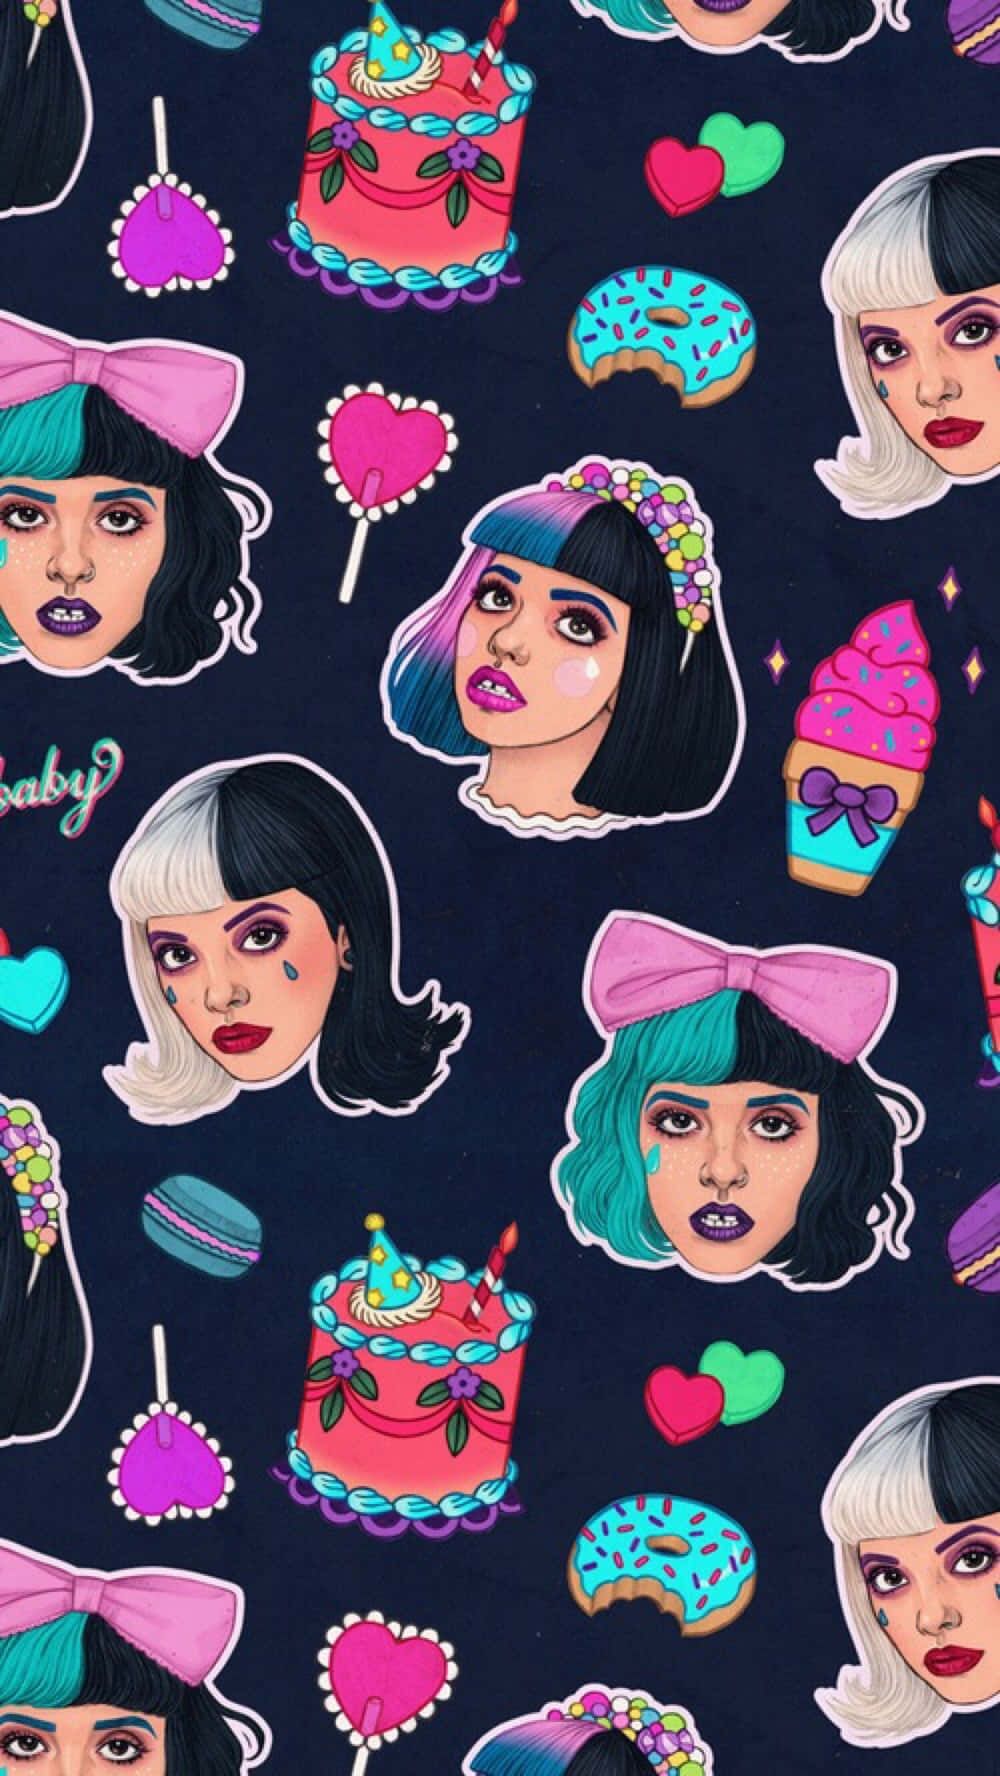 IPhone wallpaper of a pattern of cartoon girl faces with different colored hair and accessories like bows and donuts - Melanie Martinez